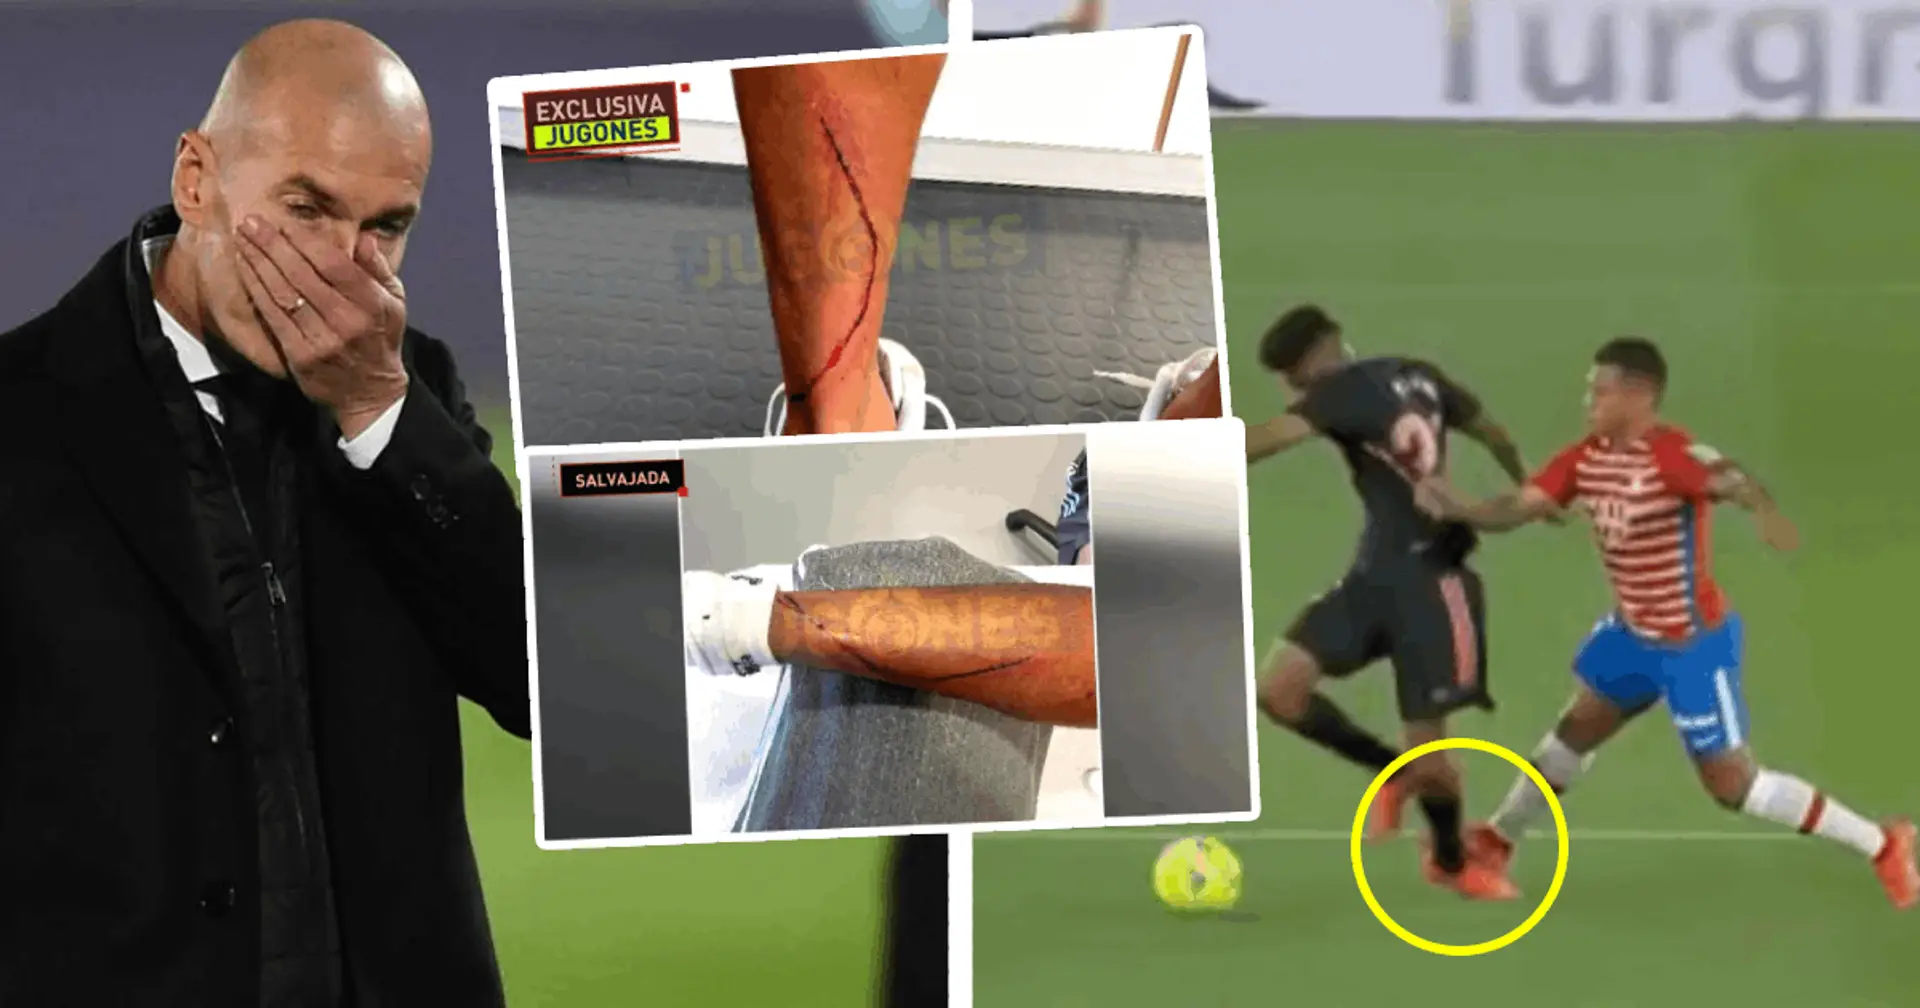 Pictures of Marvin's damaged ankle after horror tackle by Machis go viral on social media